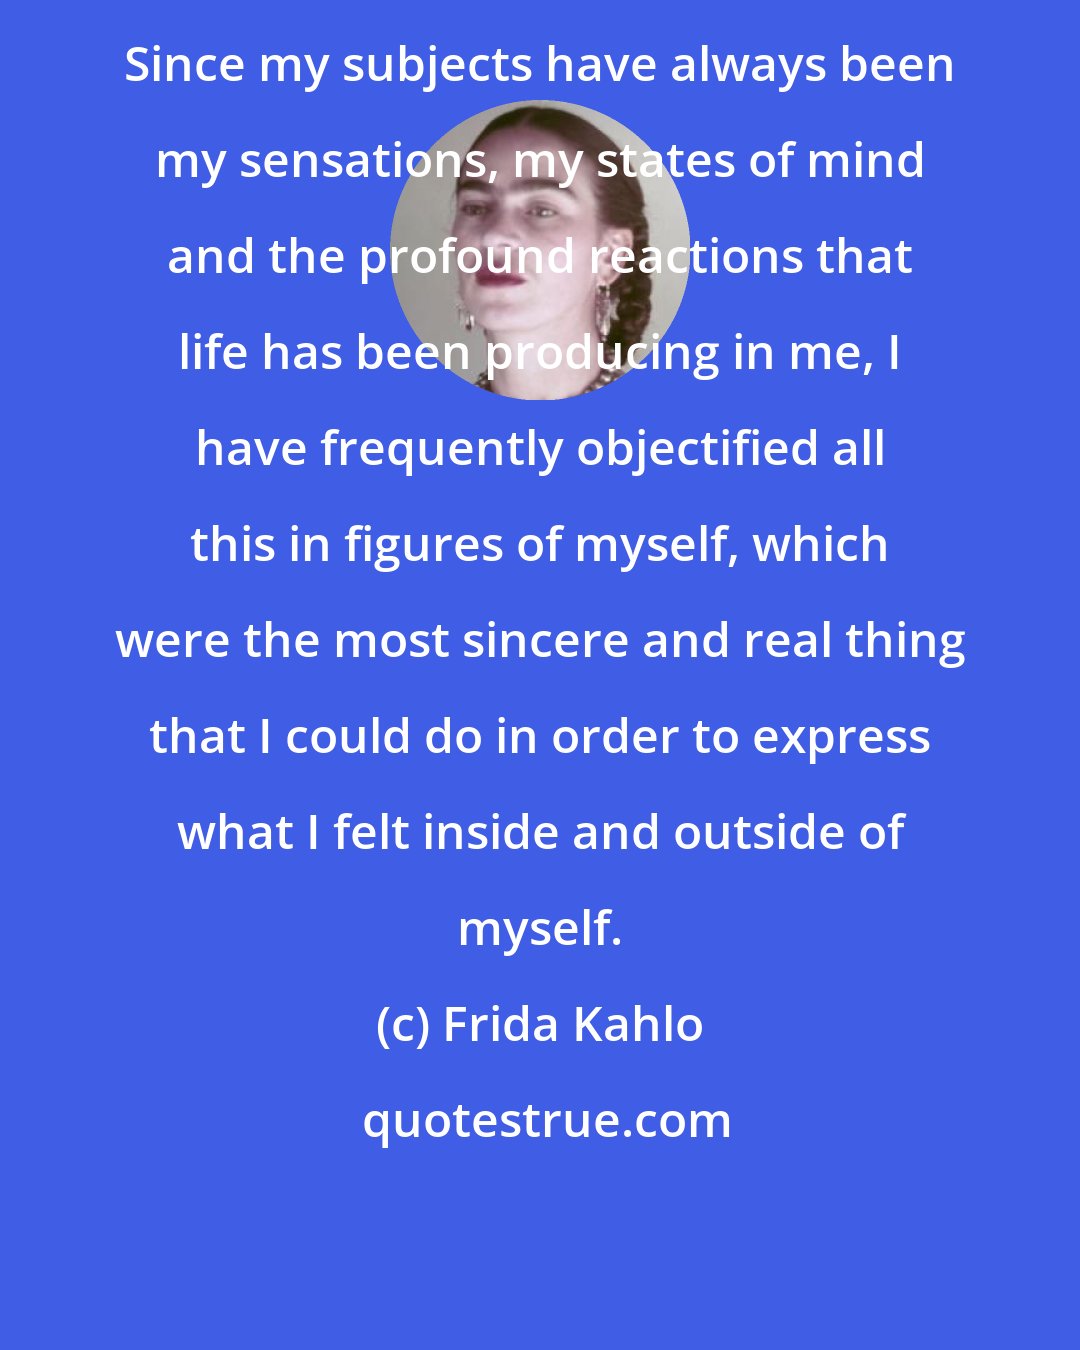 Frida Kahlo: Since my subjects have always been my sensations, my states of mind and the profound reactions that life has been producing in me, I have frequently objectified all this in figures of myself, which were the most sincere and real thing that I could do in order to express what I felt inside and outside of myself.